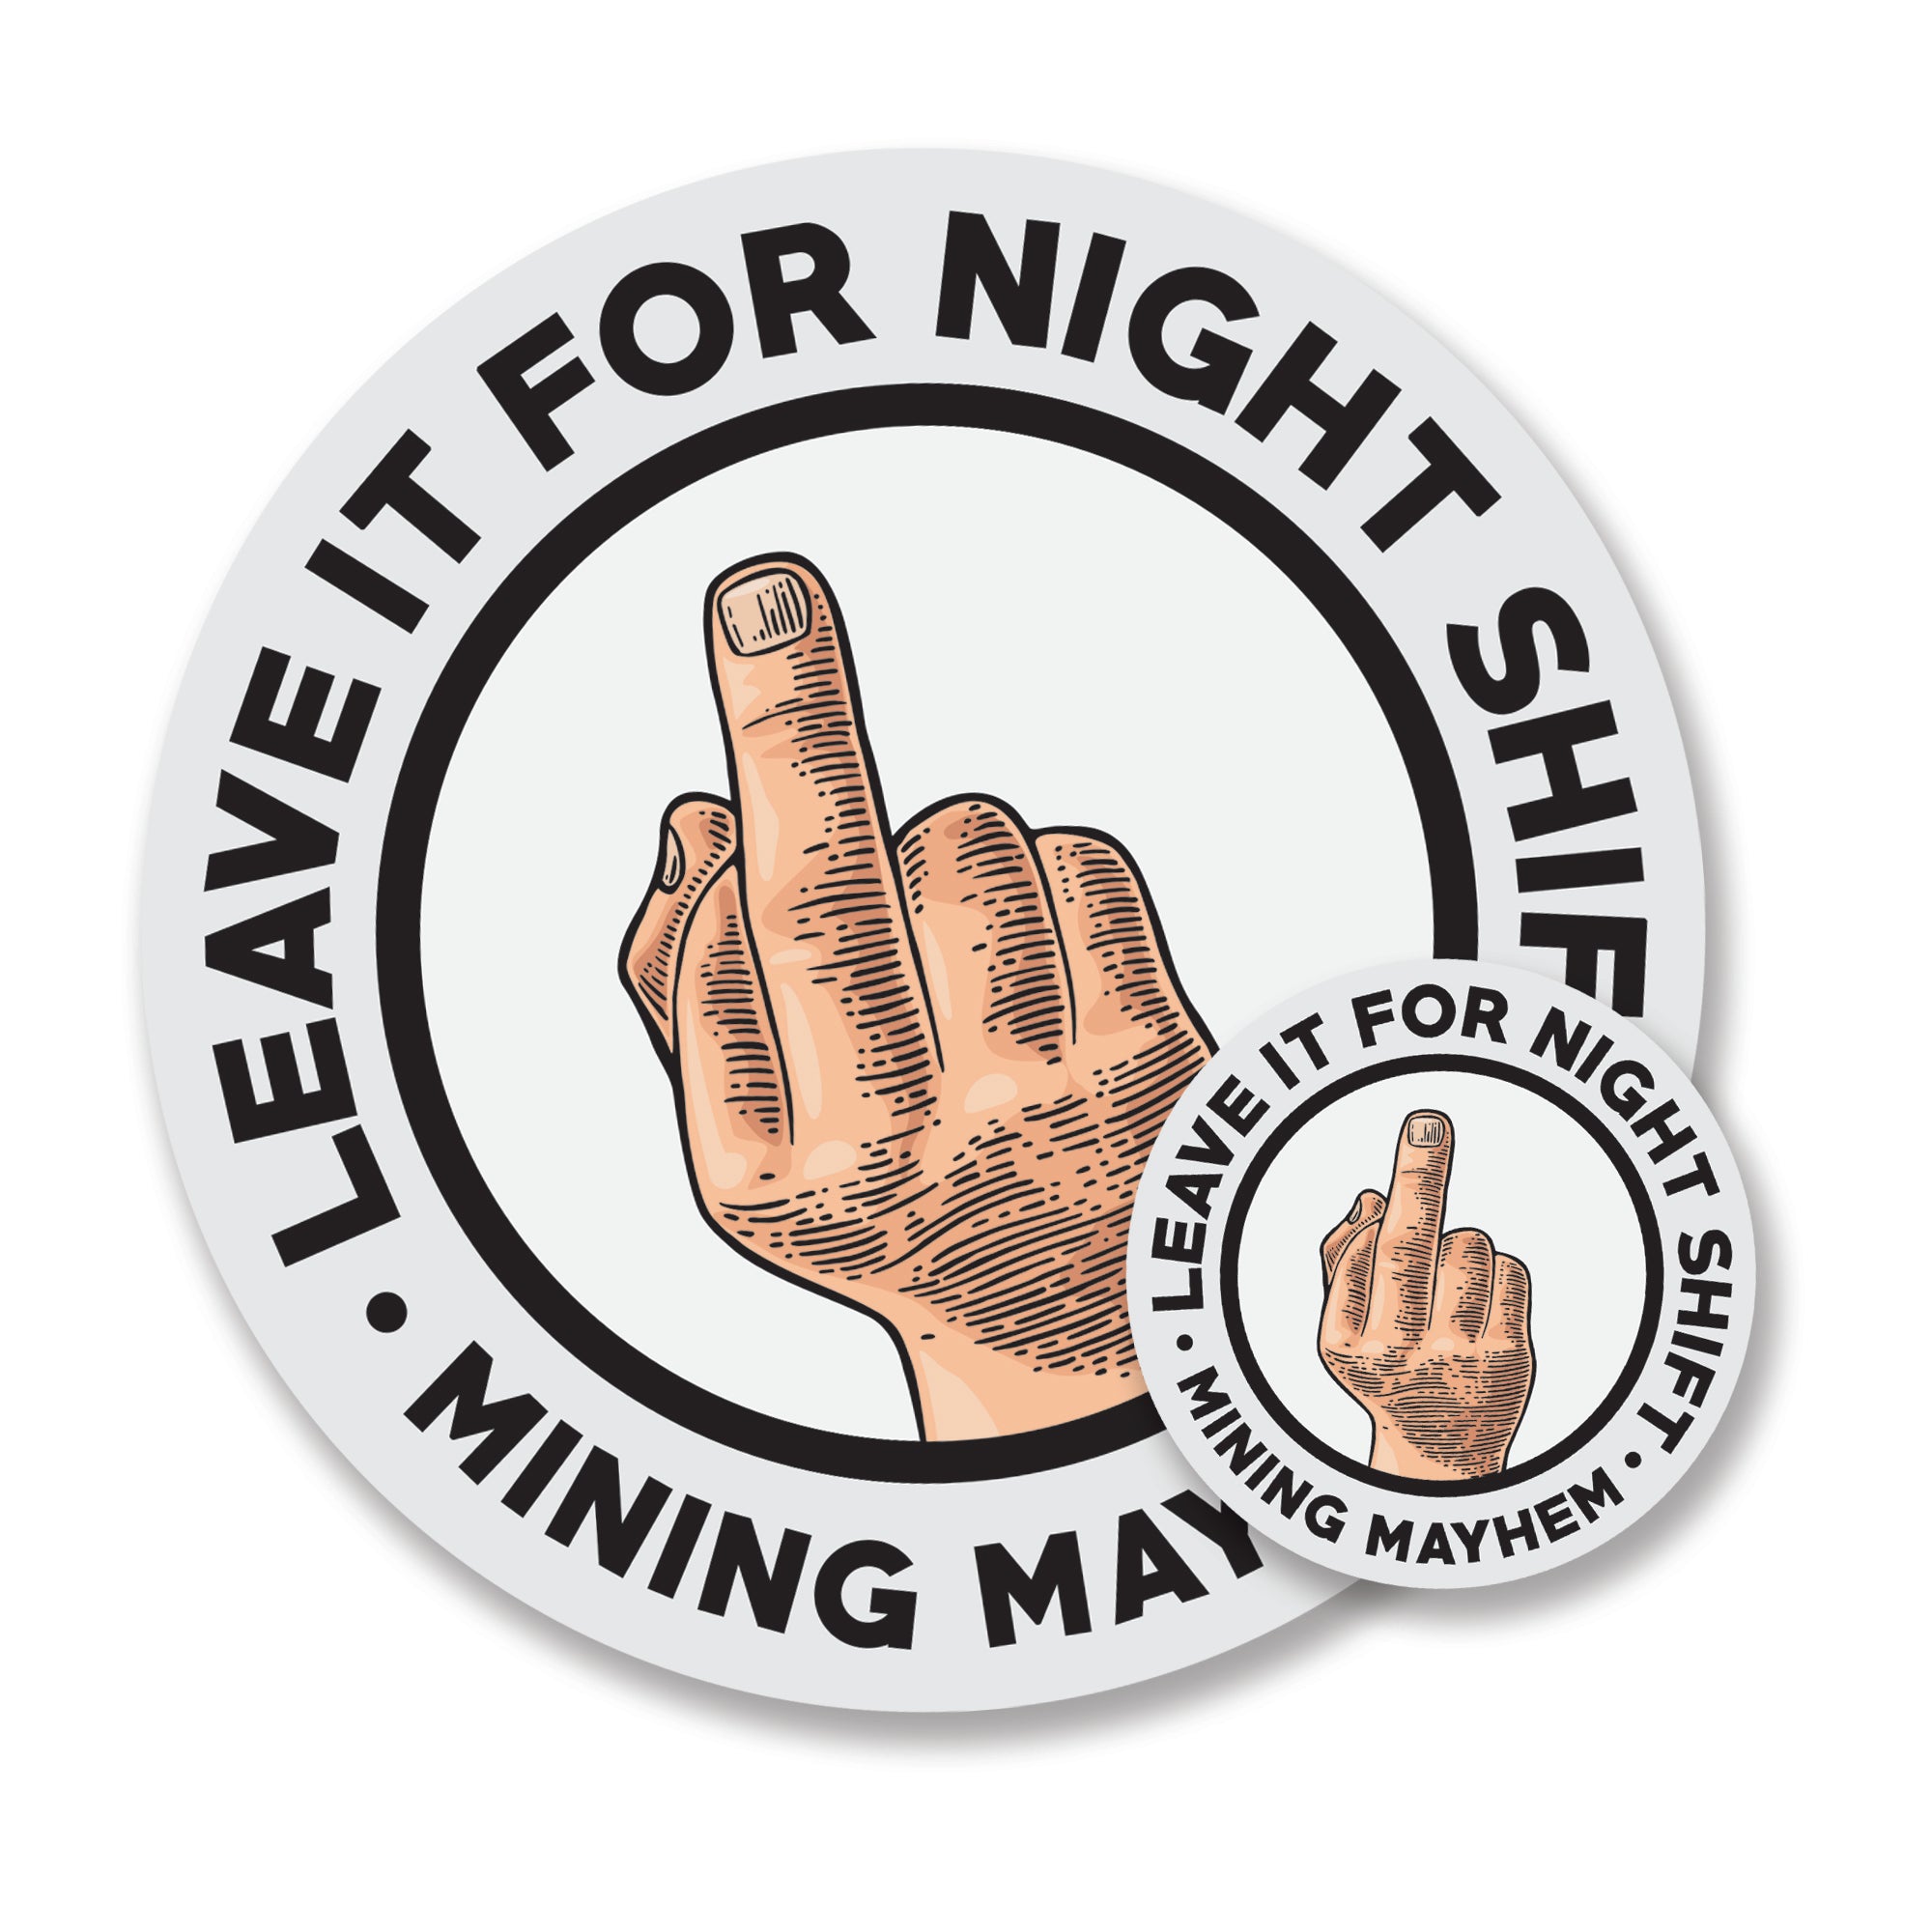 Leave It For Nightshift - Stickers (Pair)